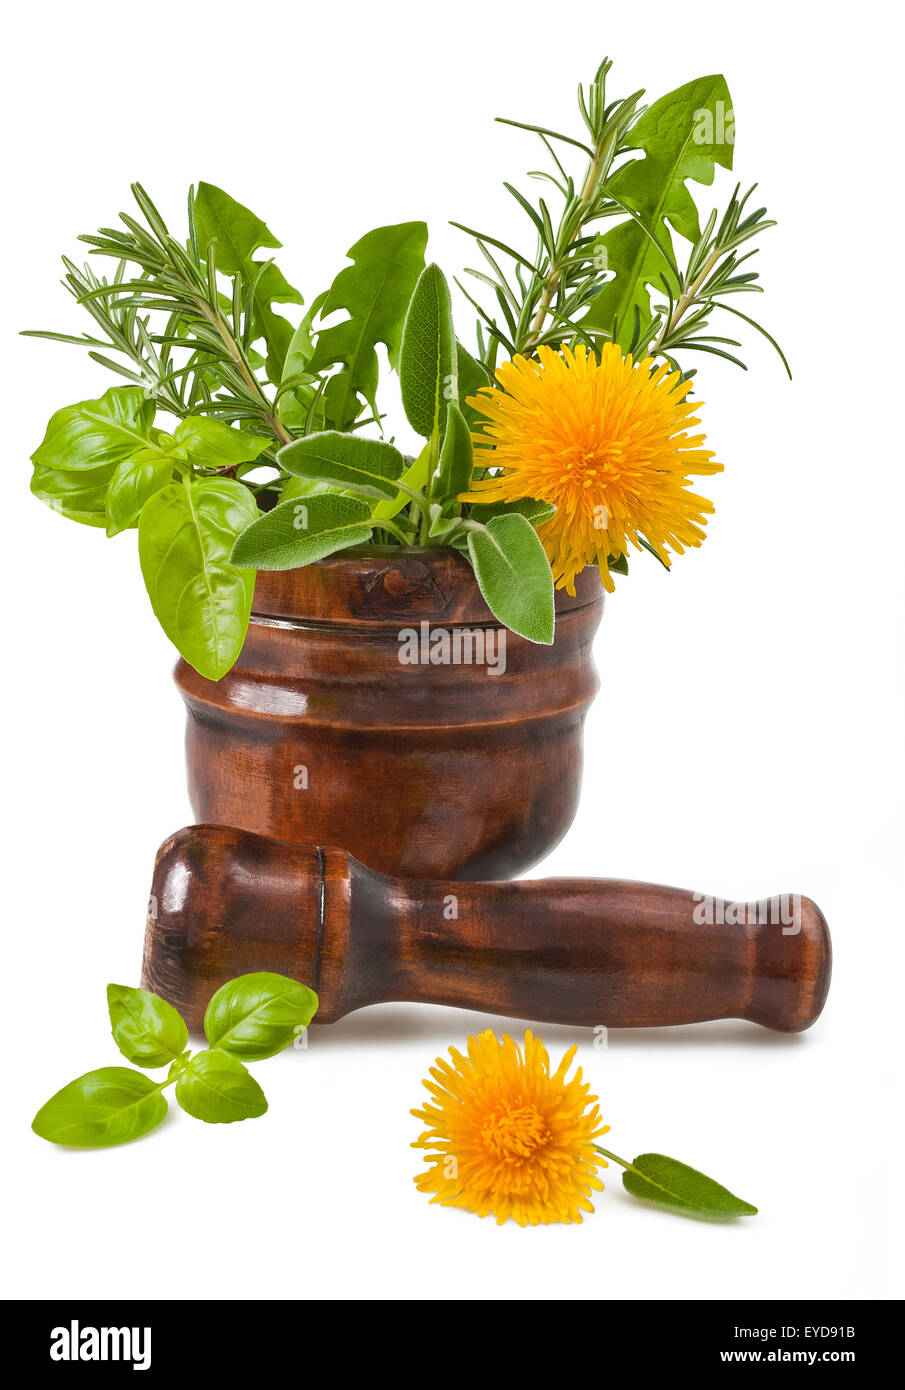 Rosemary, sage, basil and dandelion in a mortar Stock Photo